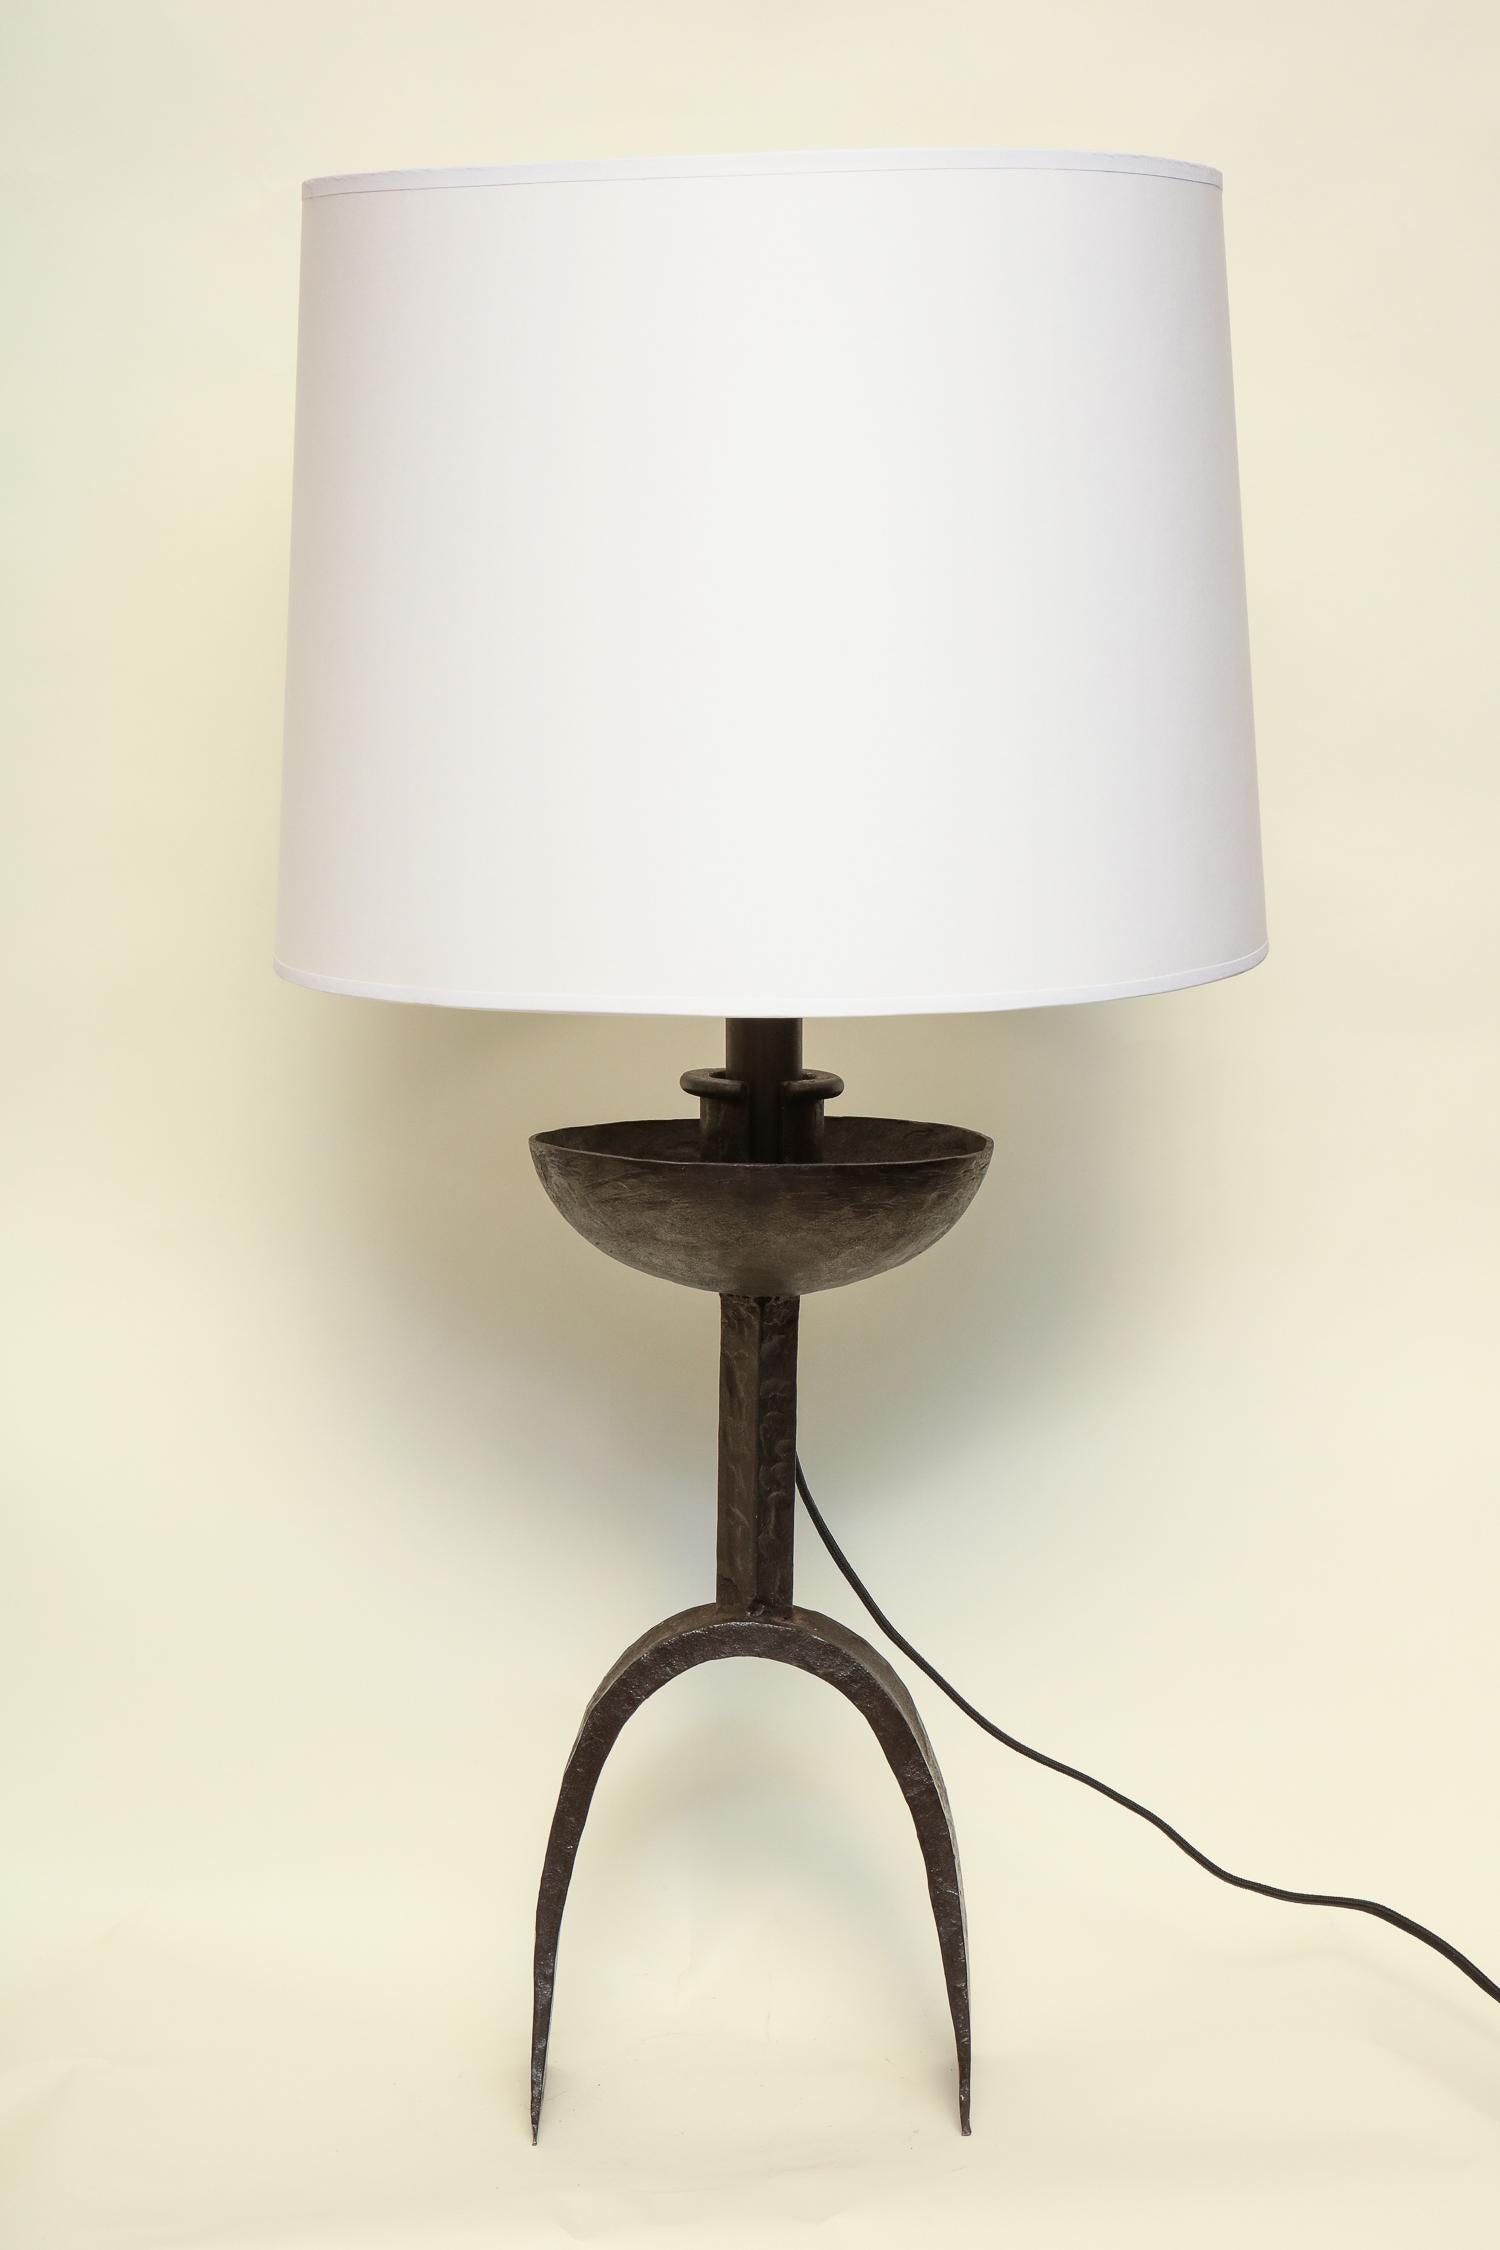 Italian Brutalist Table Lamp Handwrought Iron Mid-Century Modern, Italy, 1960s For Sale